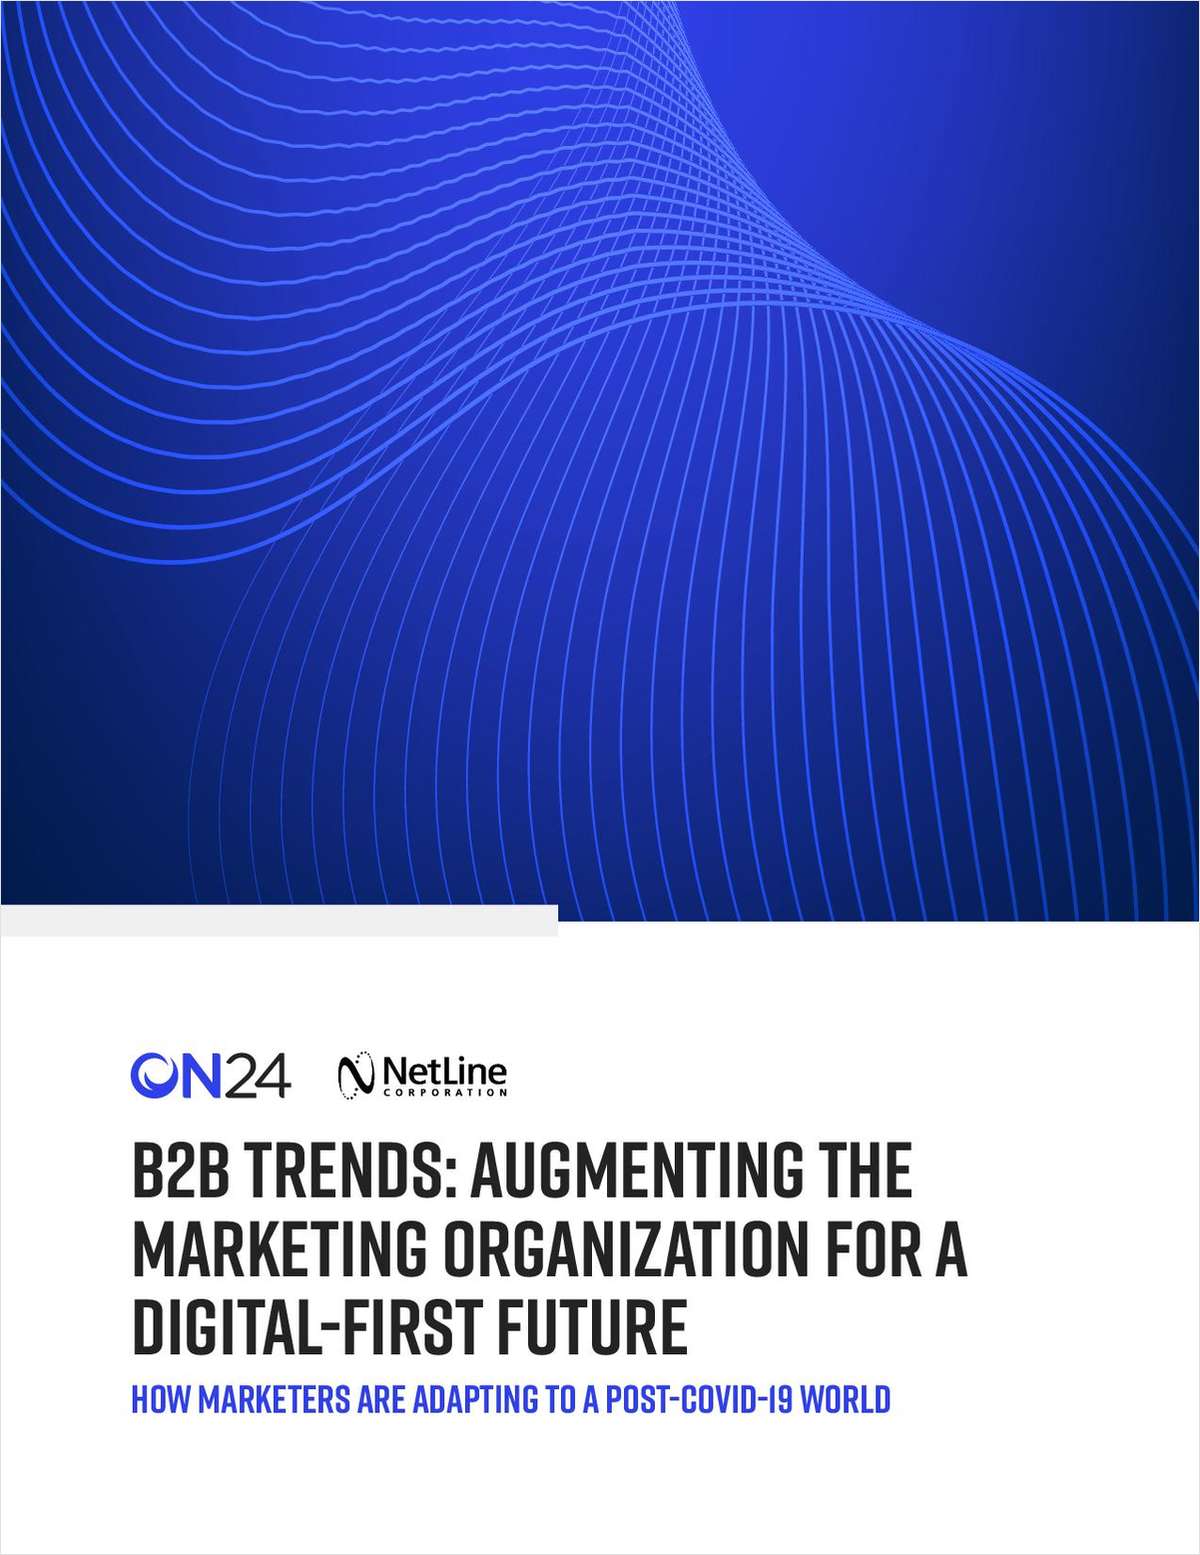 2021 B2B Marketing Trends Report: How to Augment the Marketing Organization for a Digital-First Future